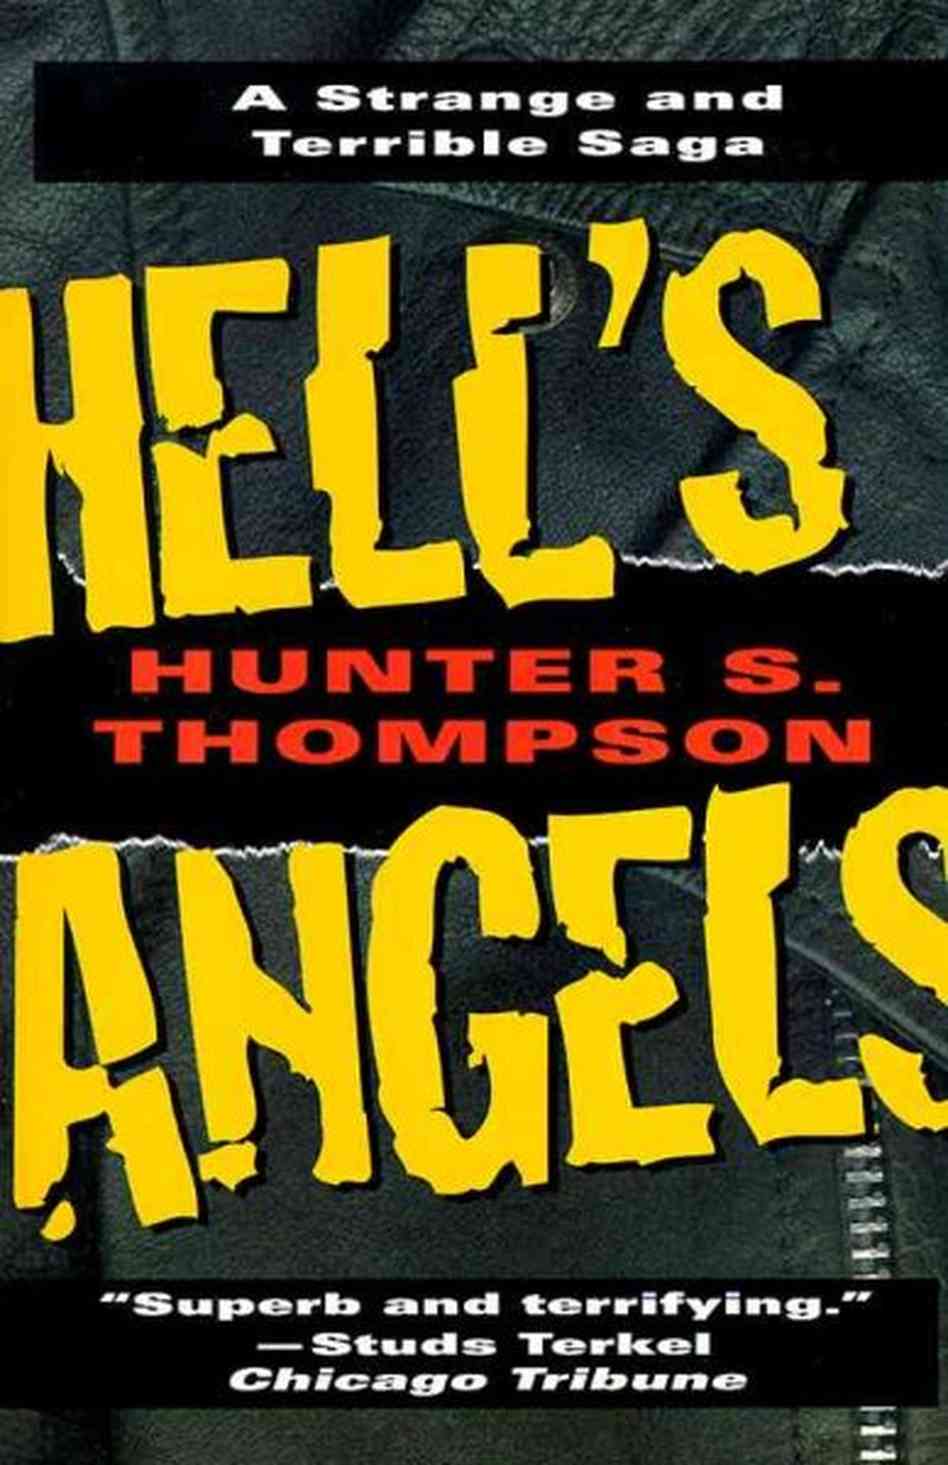 Hunter Thompson follows the hell's angels and gets in too deep